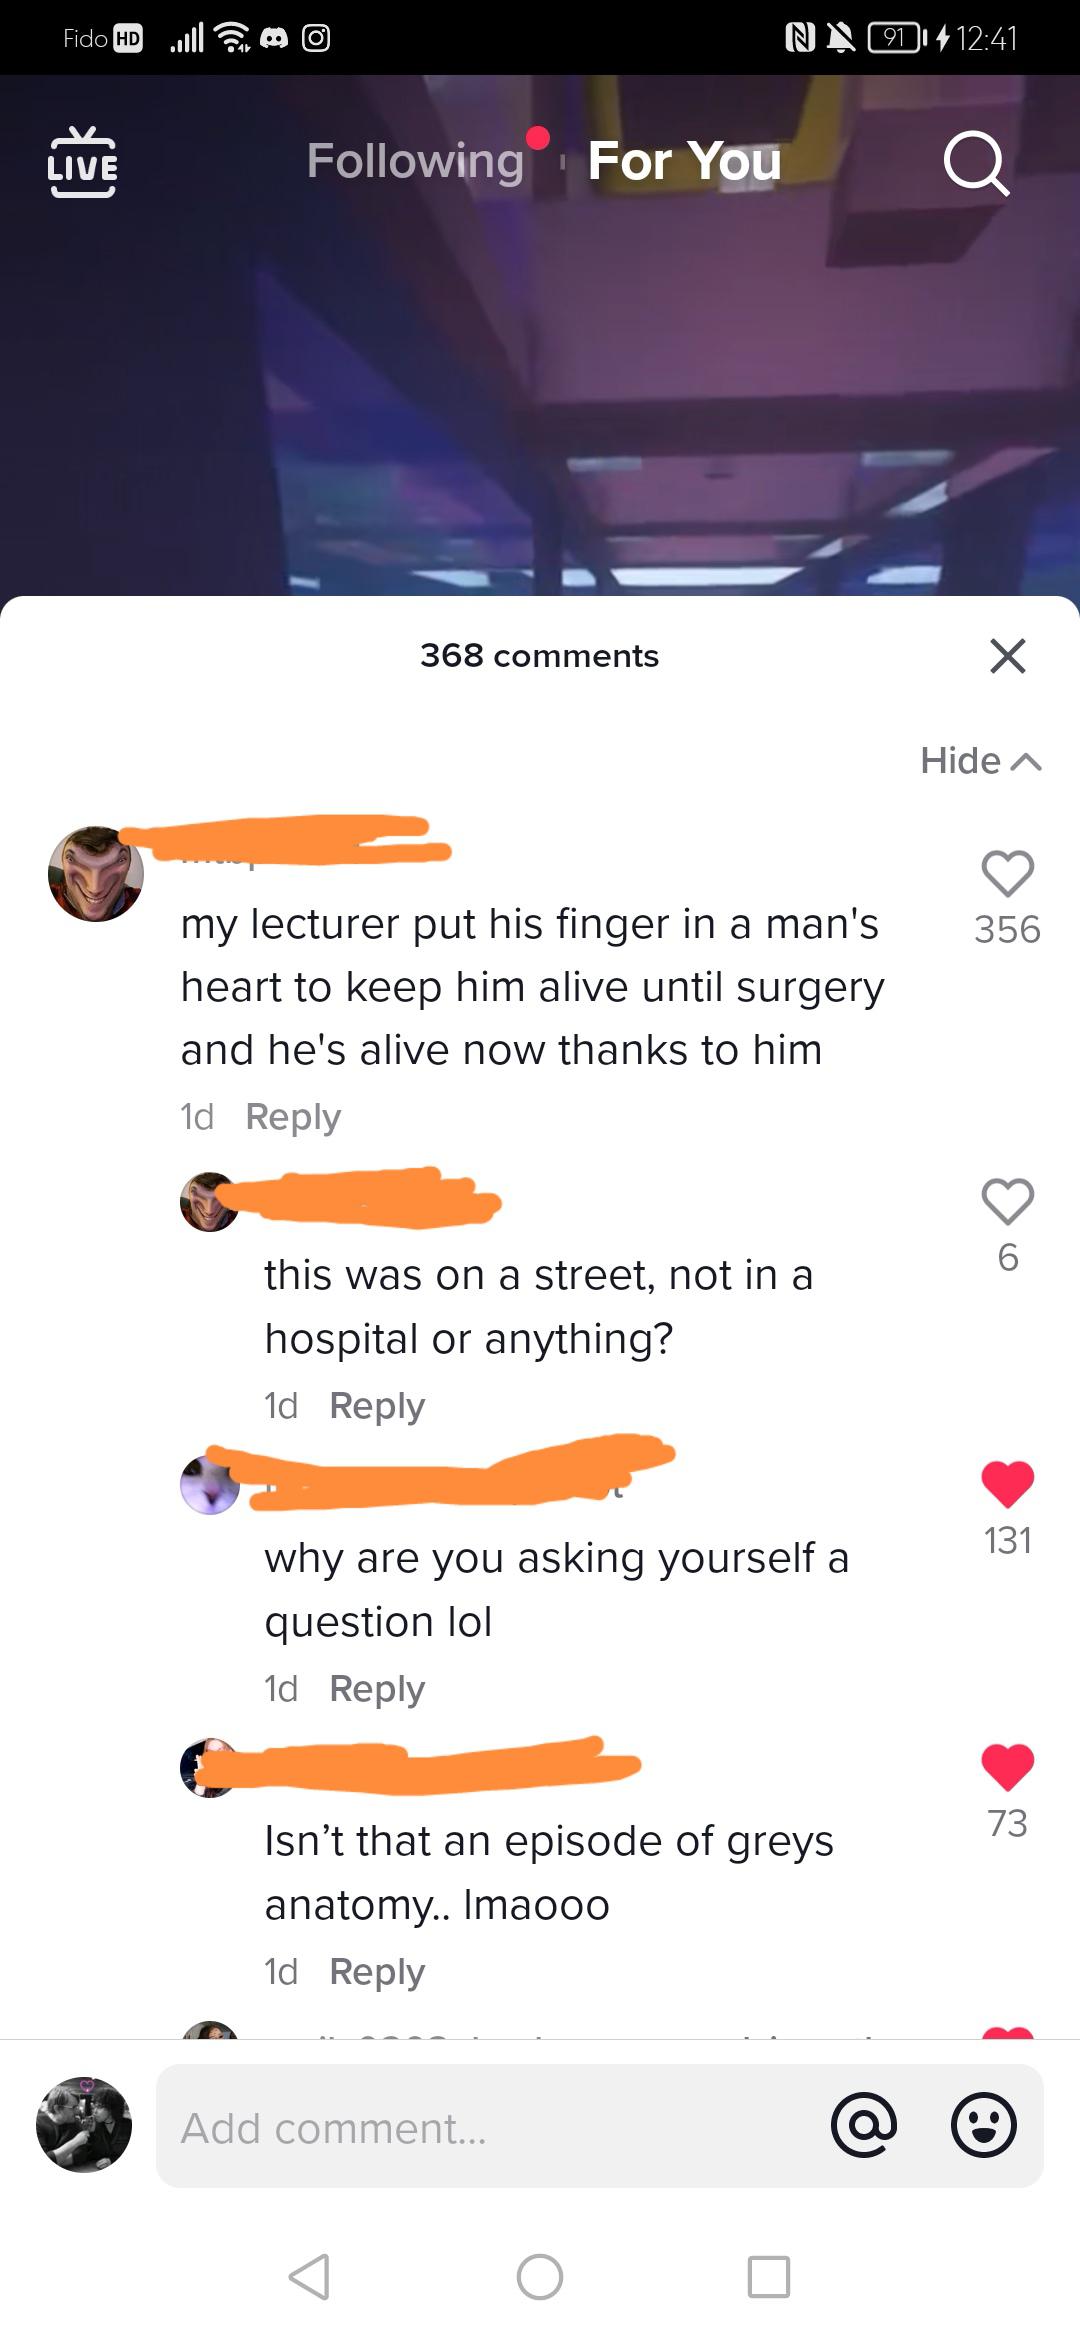 screenshot - Fido Hd Live ing For You 368 N14 my lecturer put his finger in a man's heart to keep him alive until surgery and he's alive now thanks to him 1d this was on a street, not in a hospital or anything? 1d why are you asking yourself a question lo